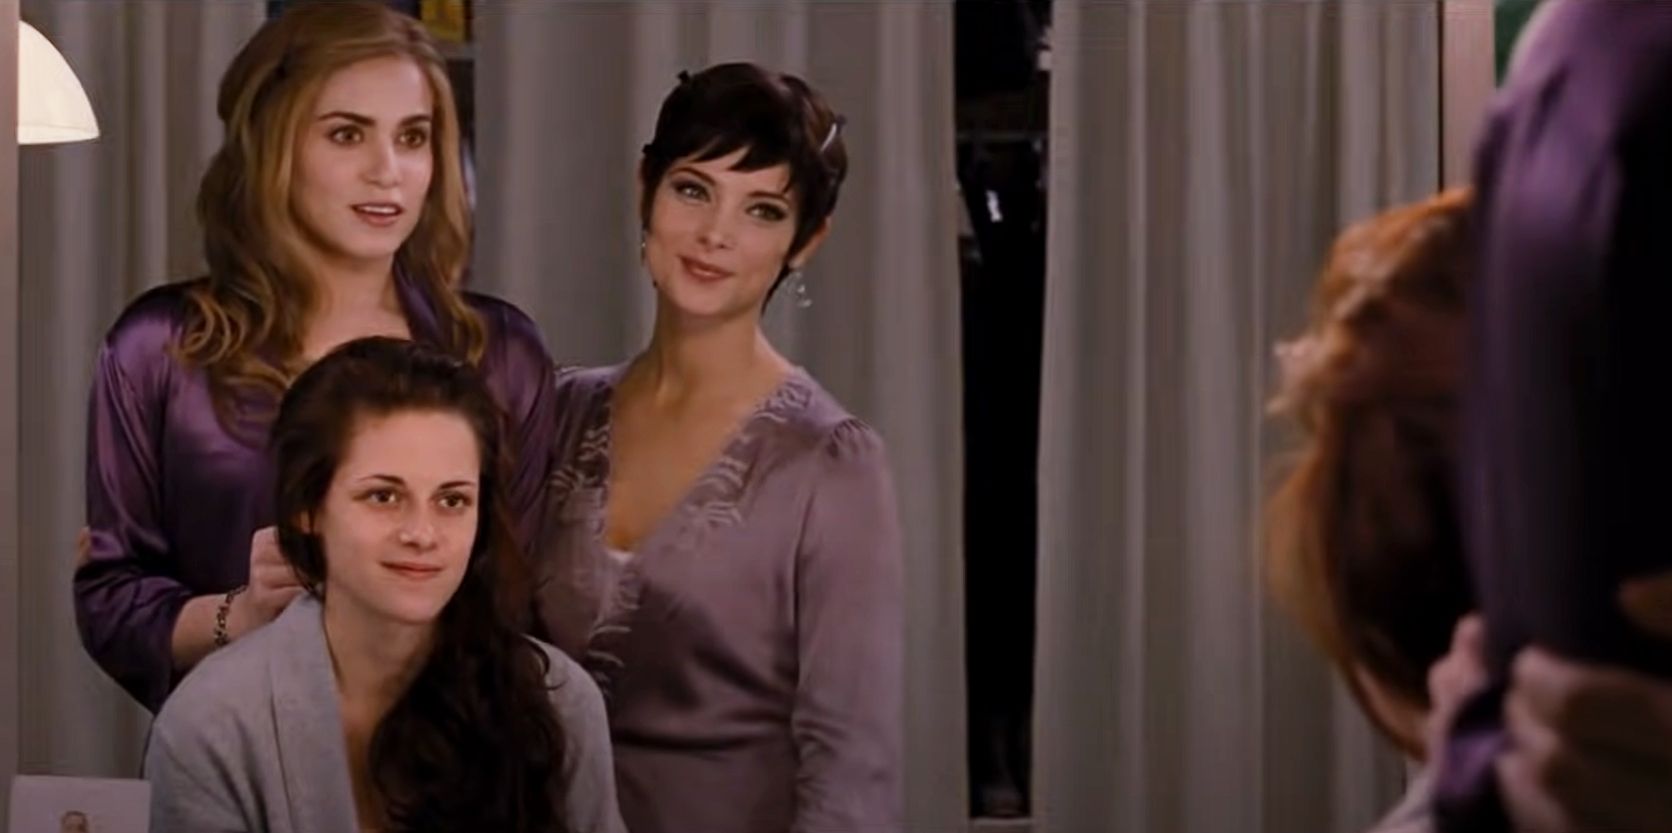 Alice and Rosalie help Bella prepare for the wedding